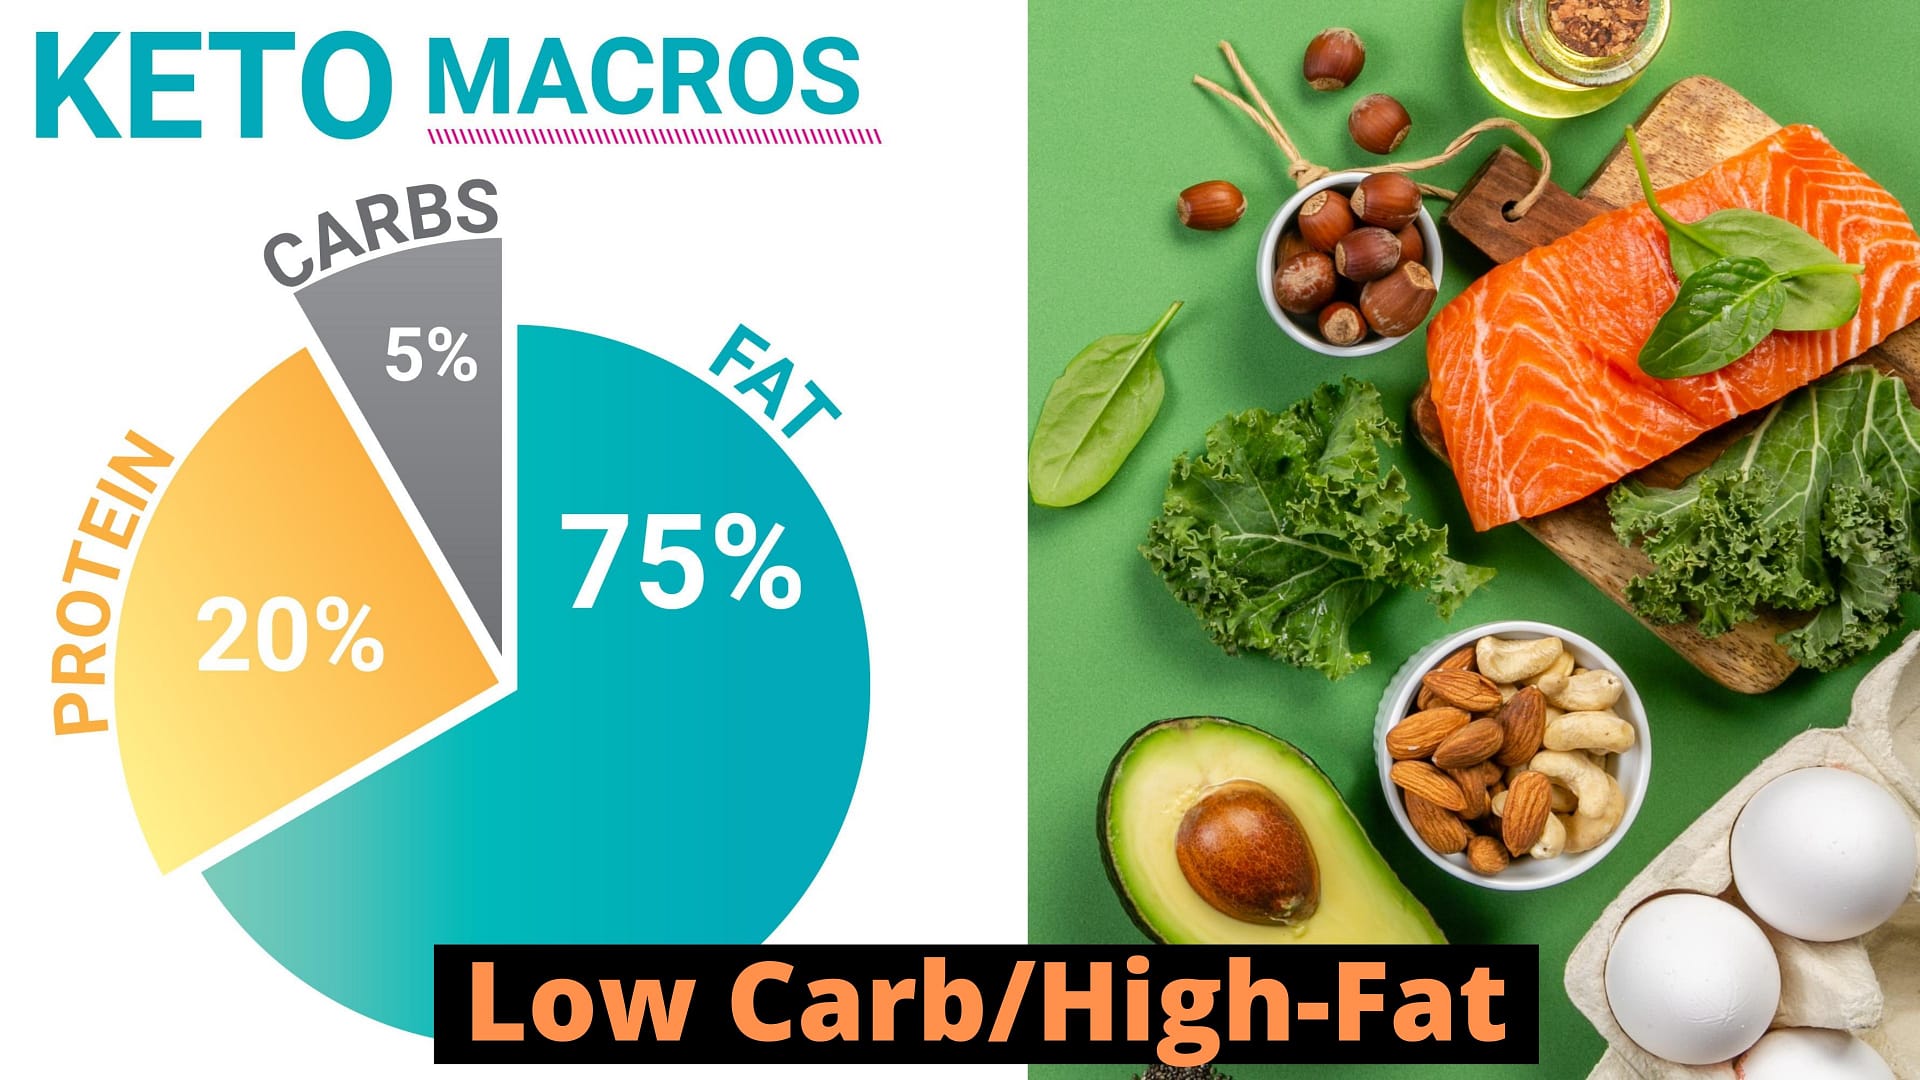 To know how to start a keto diet in 2021, we first have to know What Is A Low Carb Keto Diet?